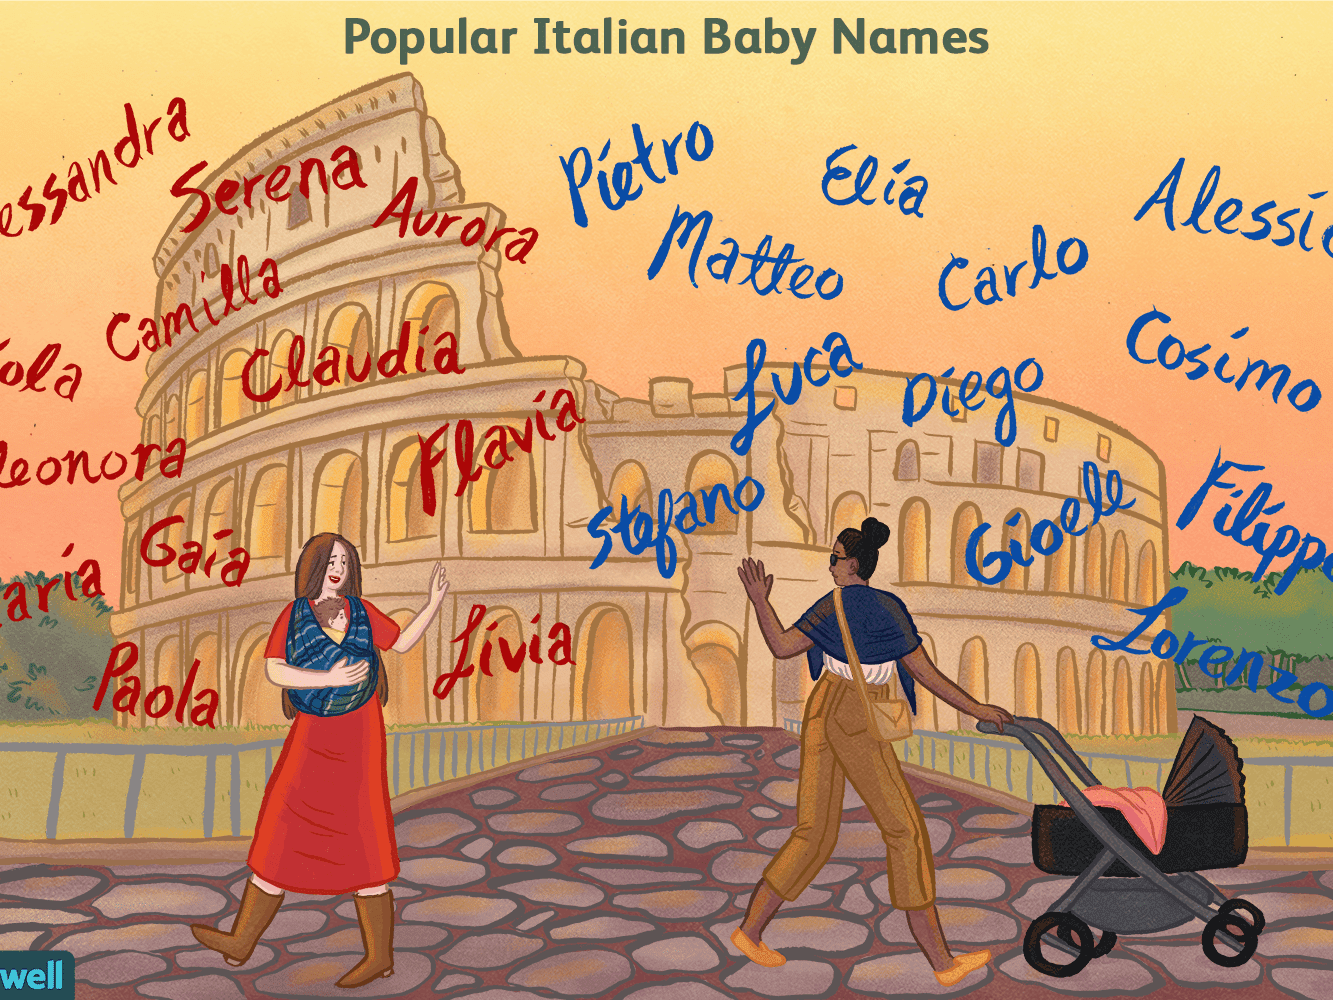 The top most common Italian names